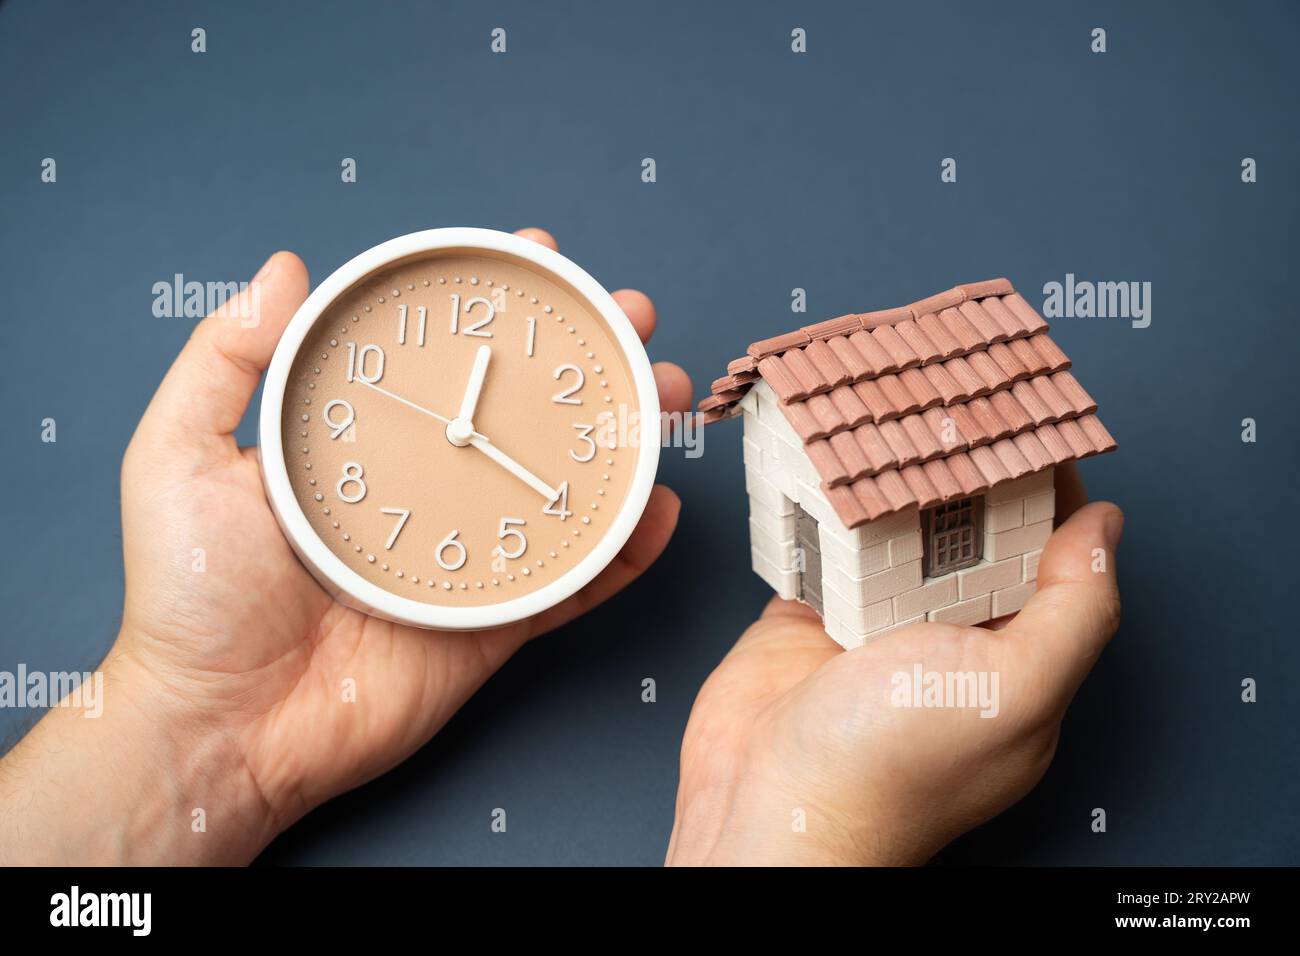 House and clock in hands. Importance of cherishing every moment spent with loved ones. Allocate time for relaxation and self-care amidst busy schedule Stock Photo